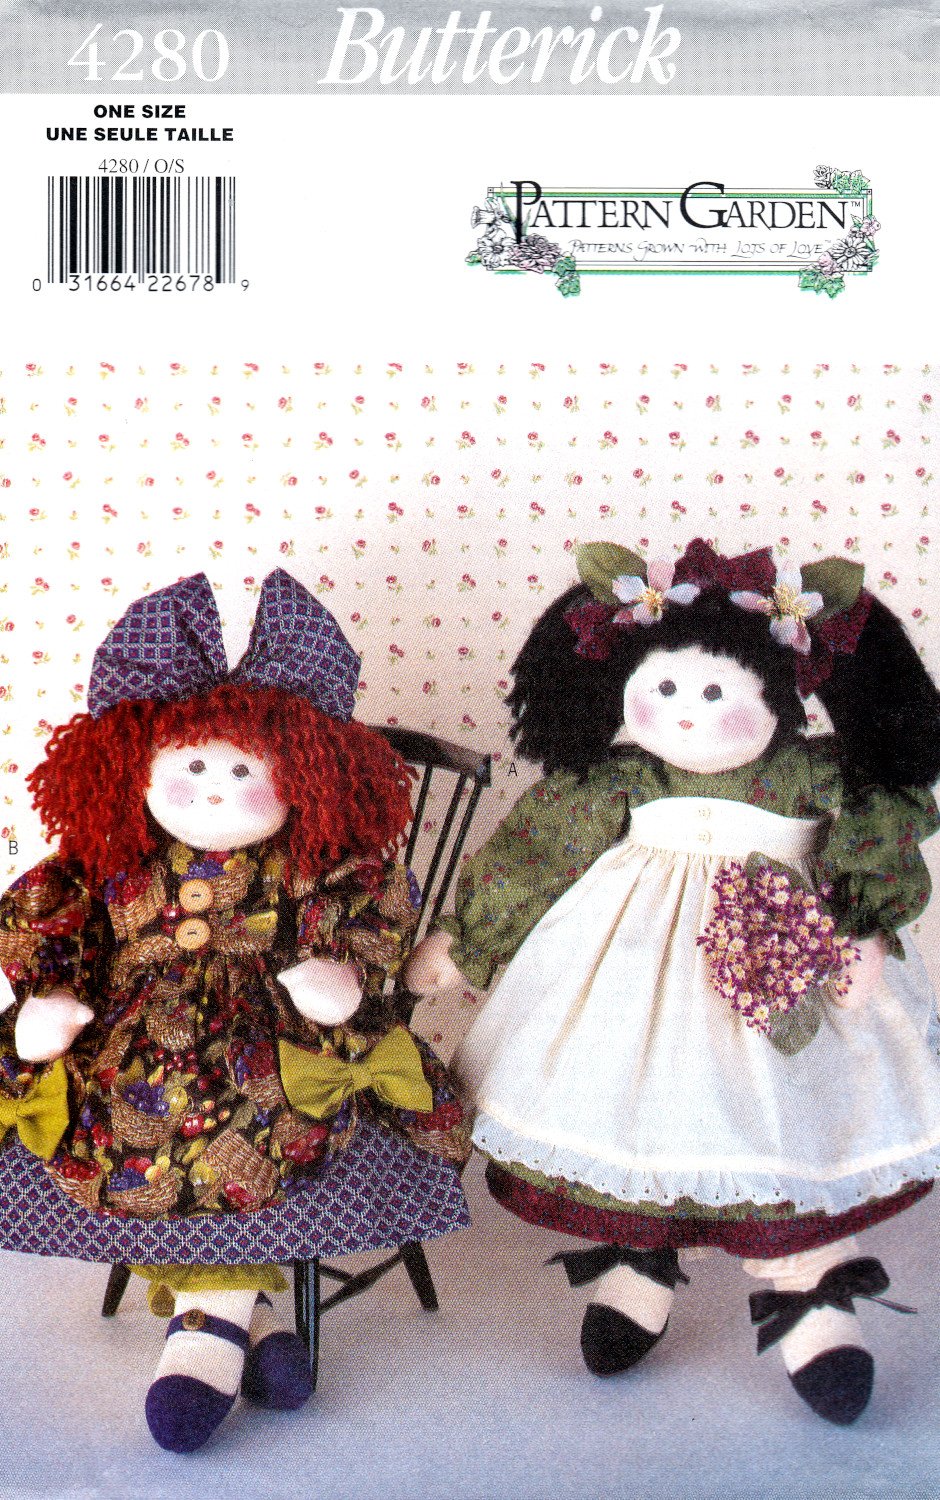 Butterick 4280 Garden Decorative Collectible Dolls Crafts Sewing Pattern Size OSZ